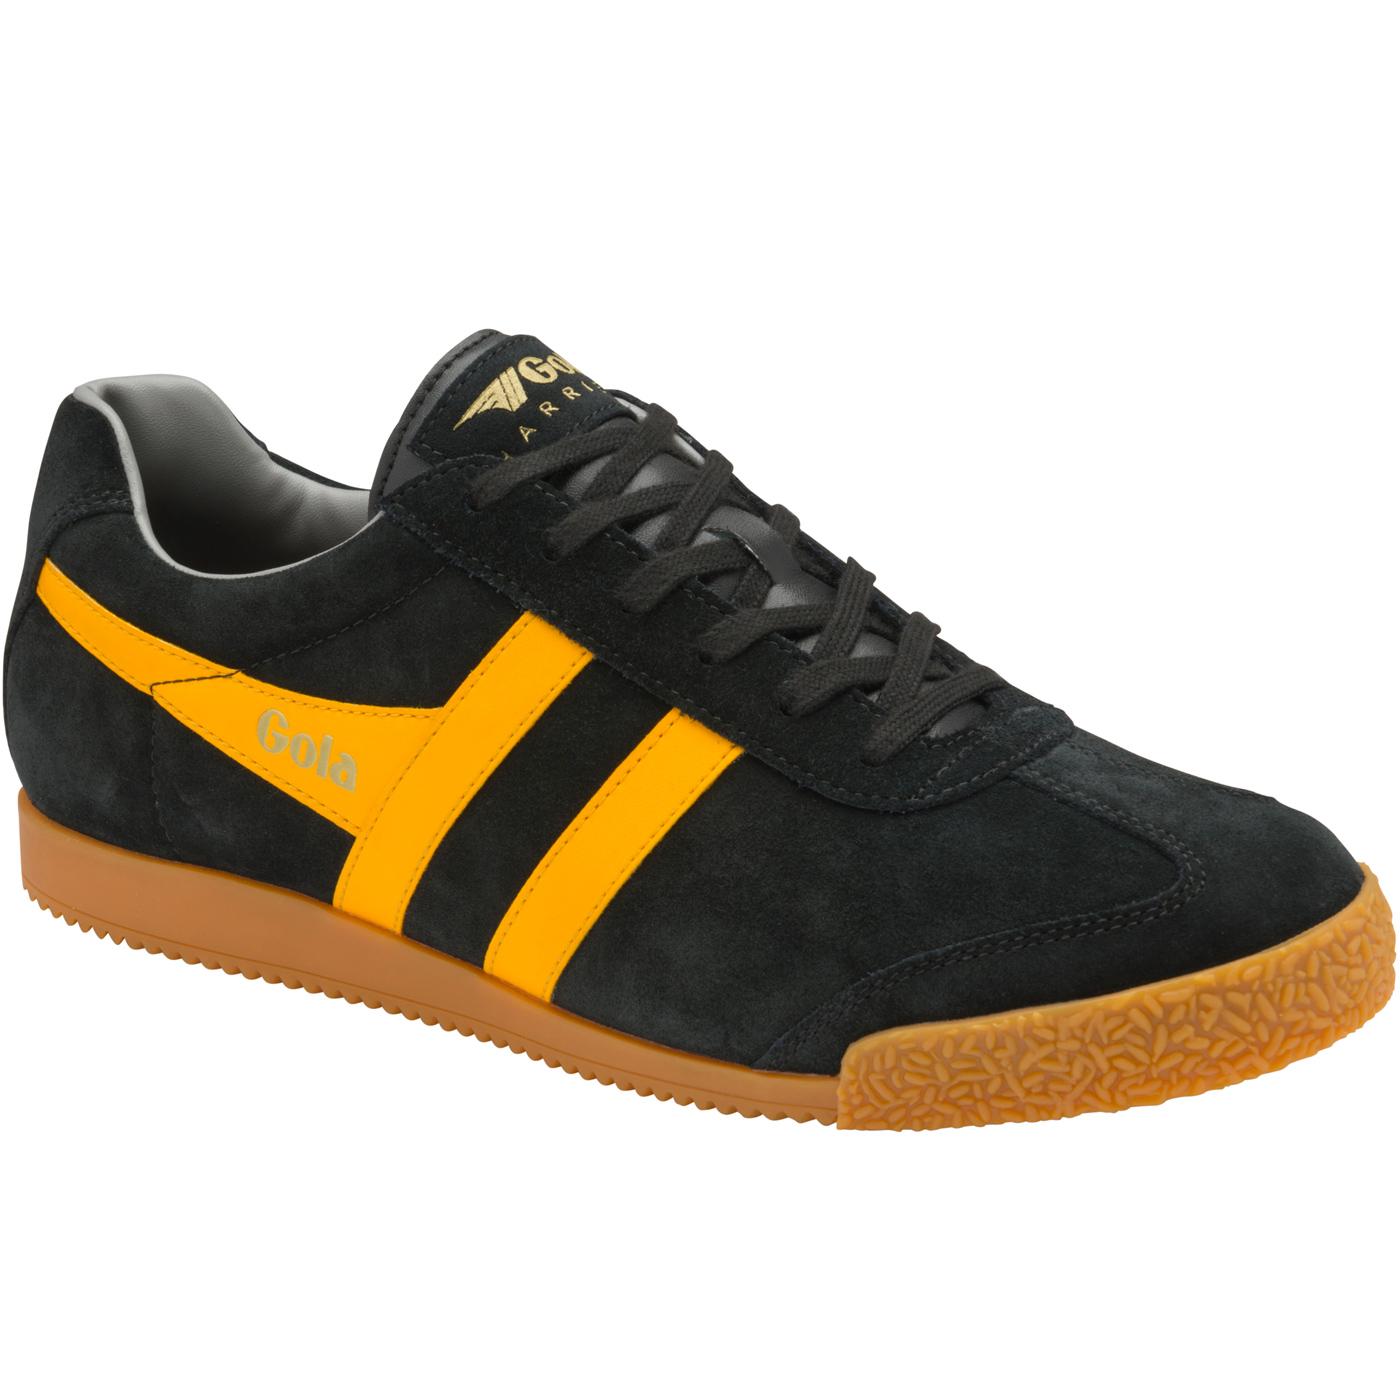 GOLA Harrier Suede Mens Retro 70s Trainers (B/S/G)